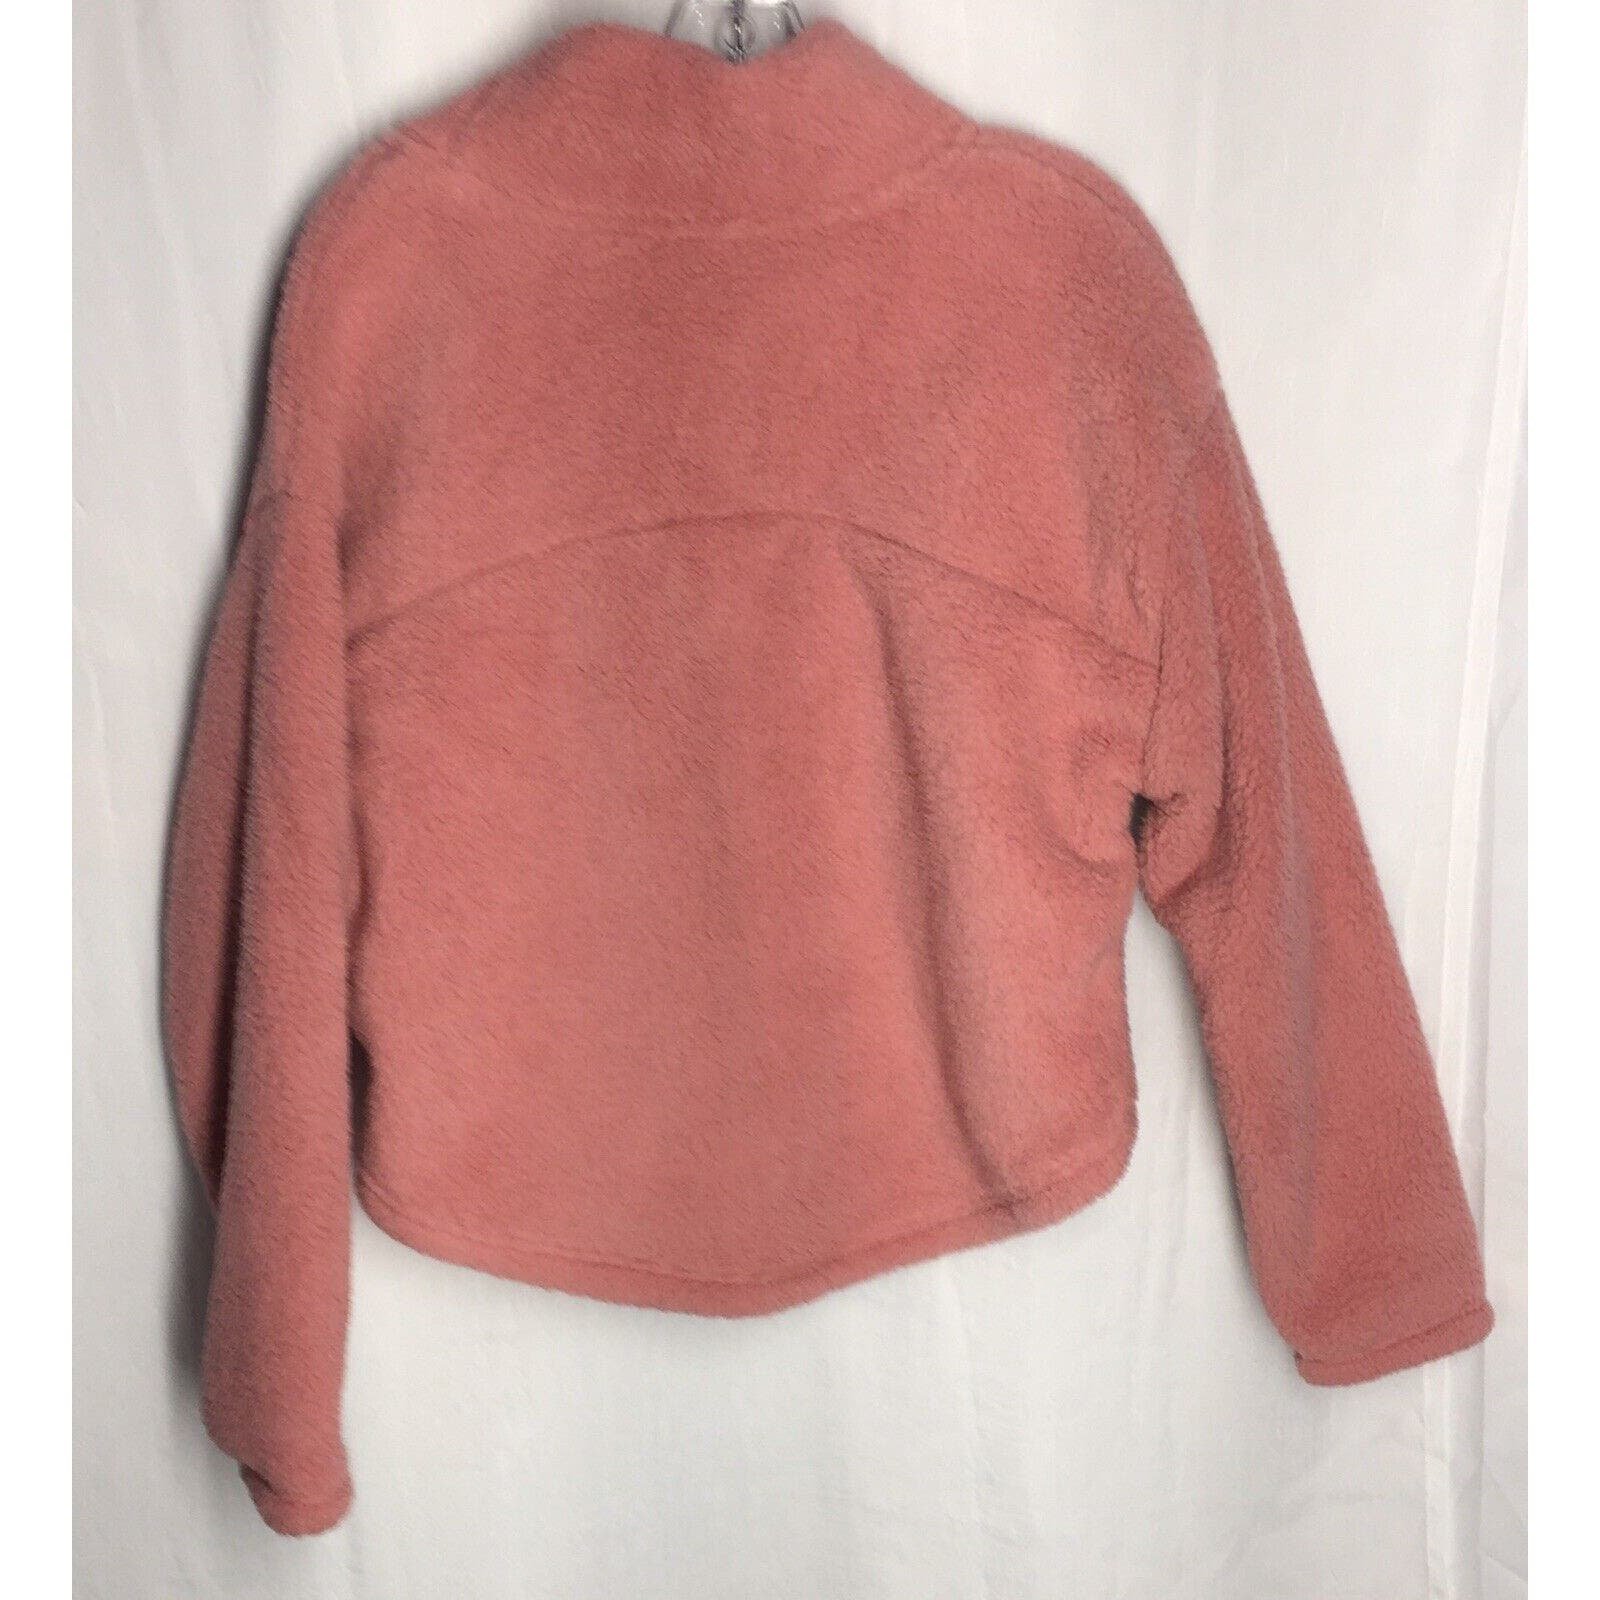 Custom All In Motion Sherpa XL Woman’s Pink Cowl Neck Pull Over High Neck Pockets k5JwJ2Kl2 Cool